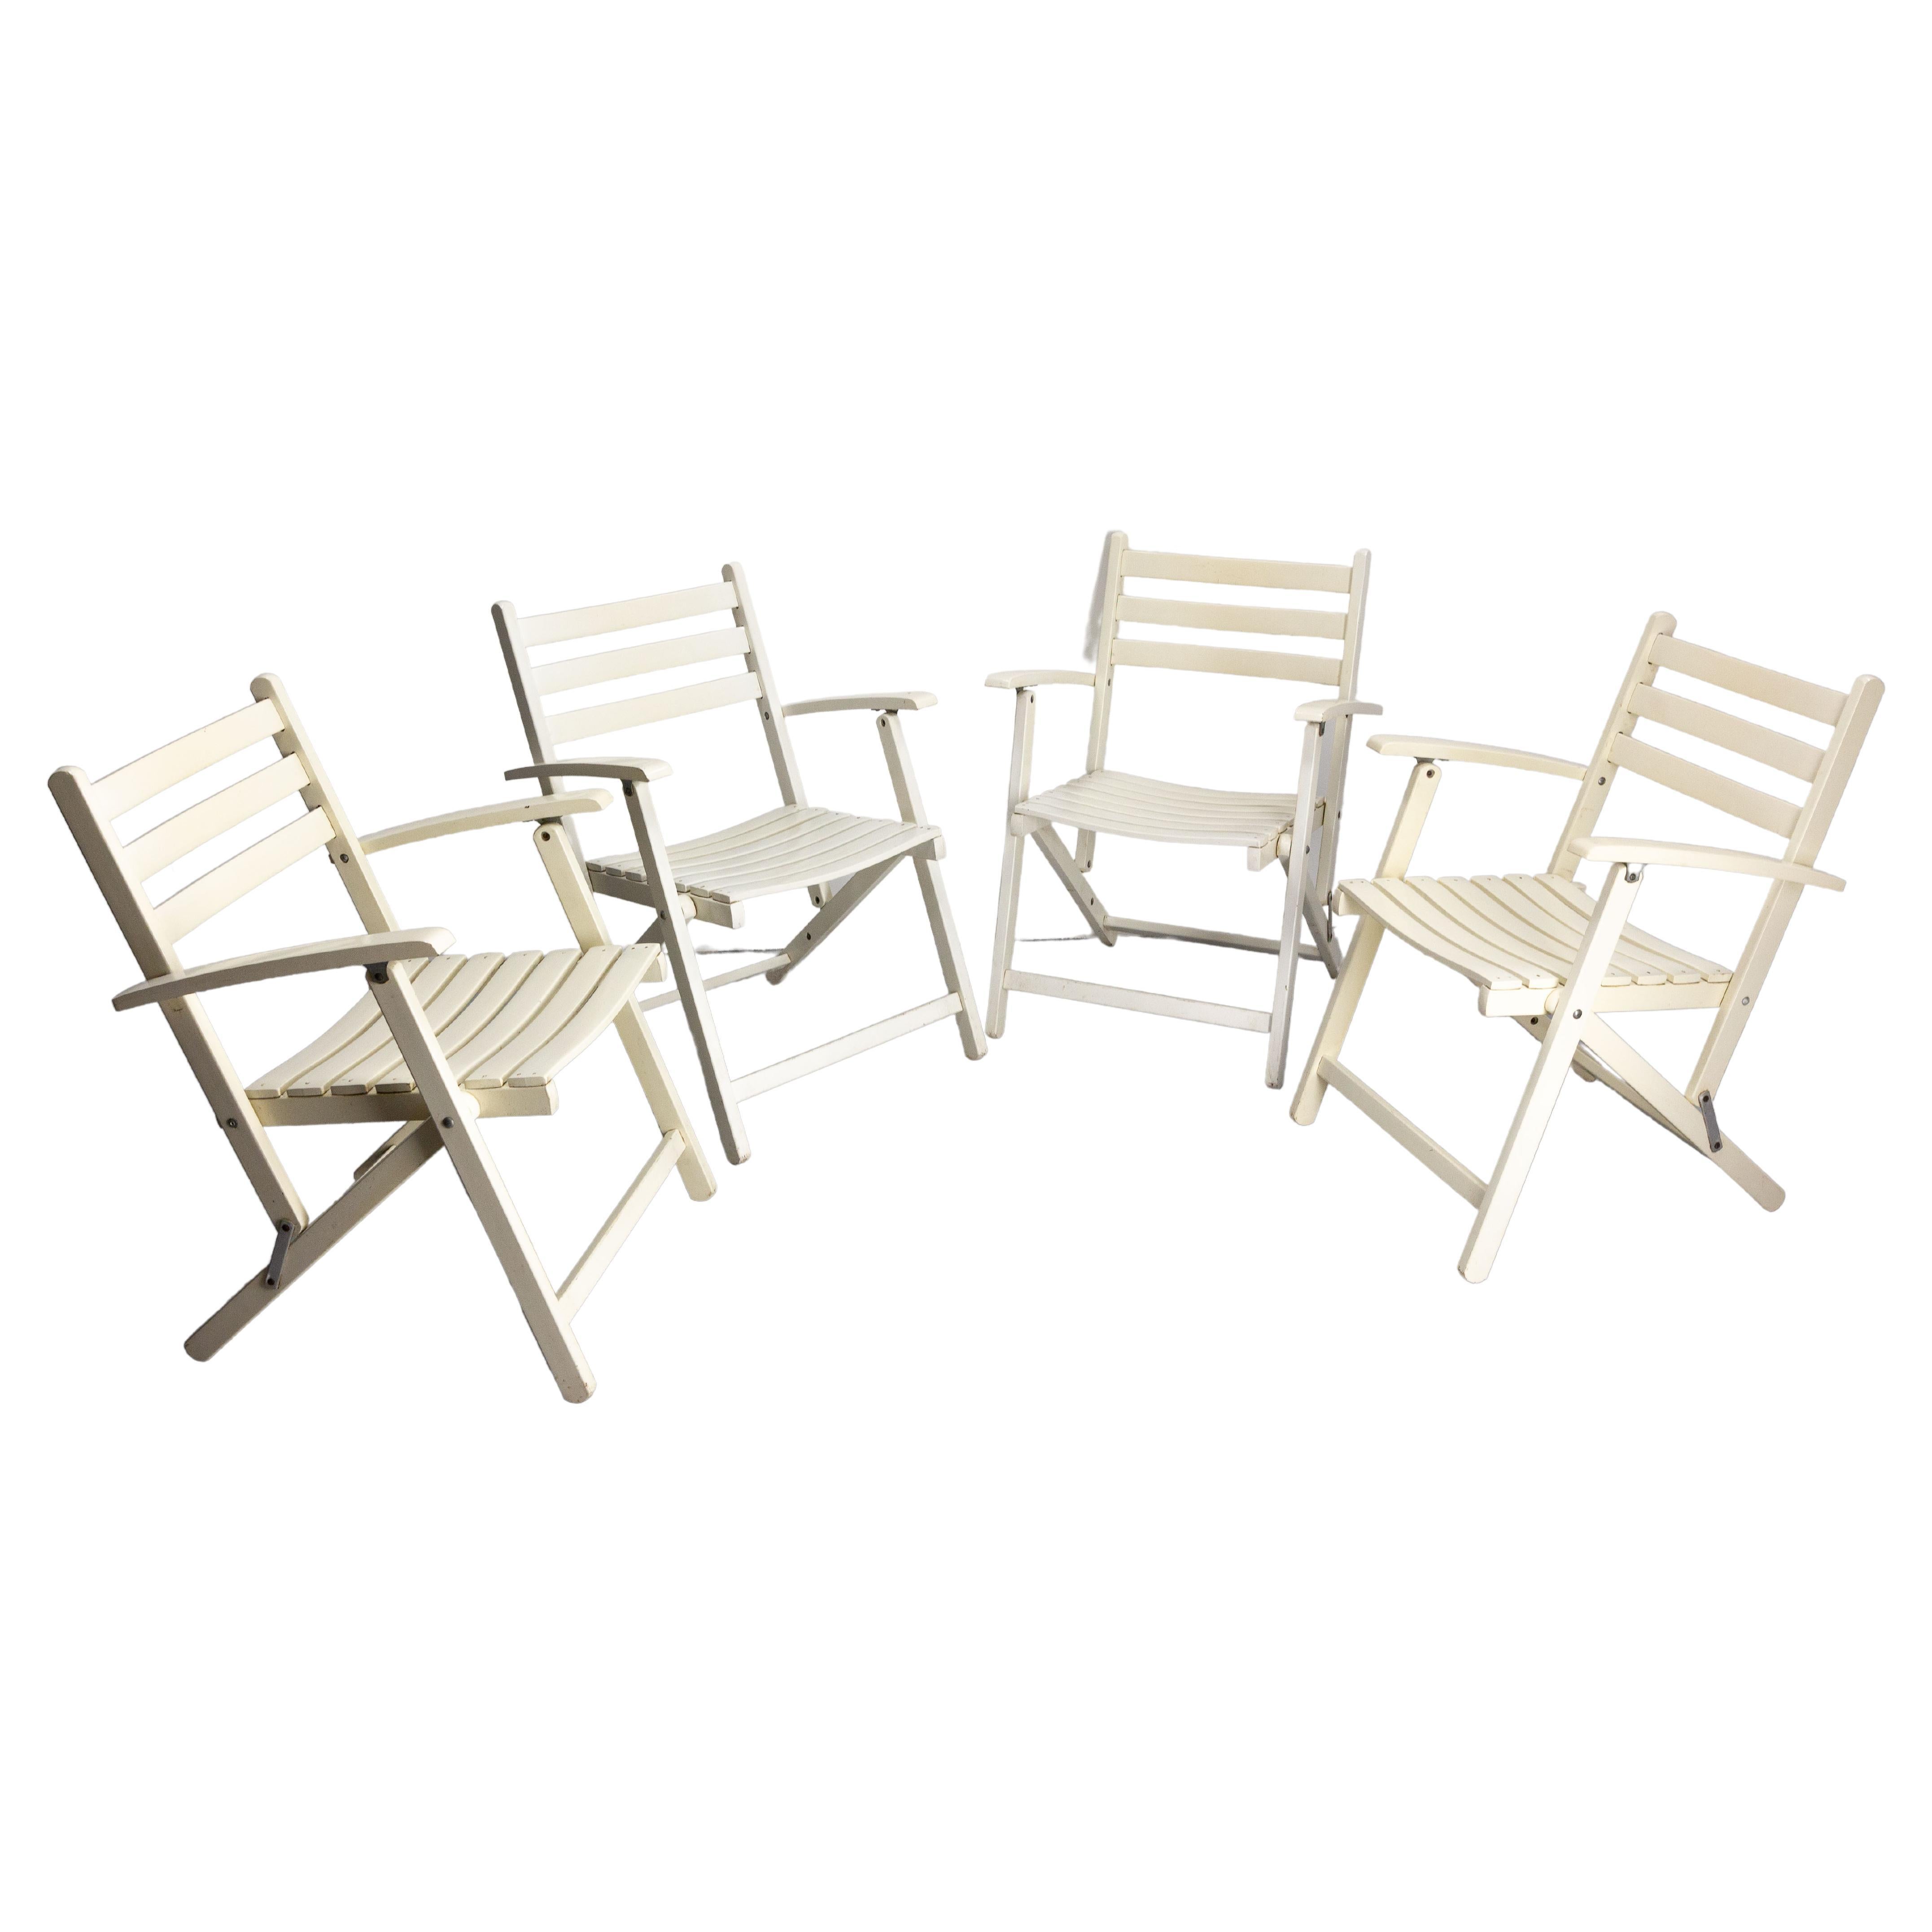  Four Wood Dining Folding Chairsgarden and Patio by Dejou